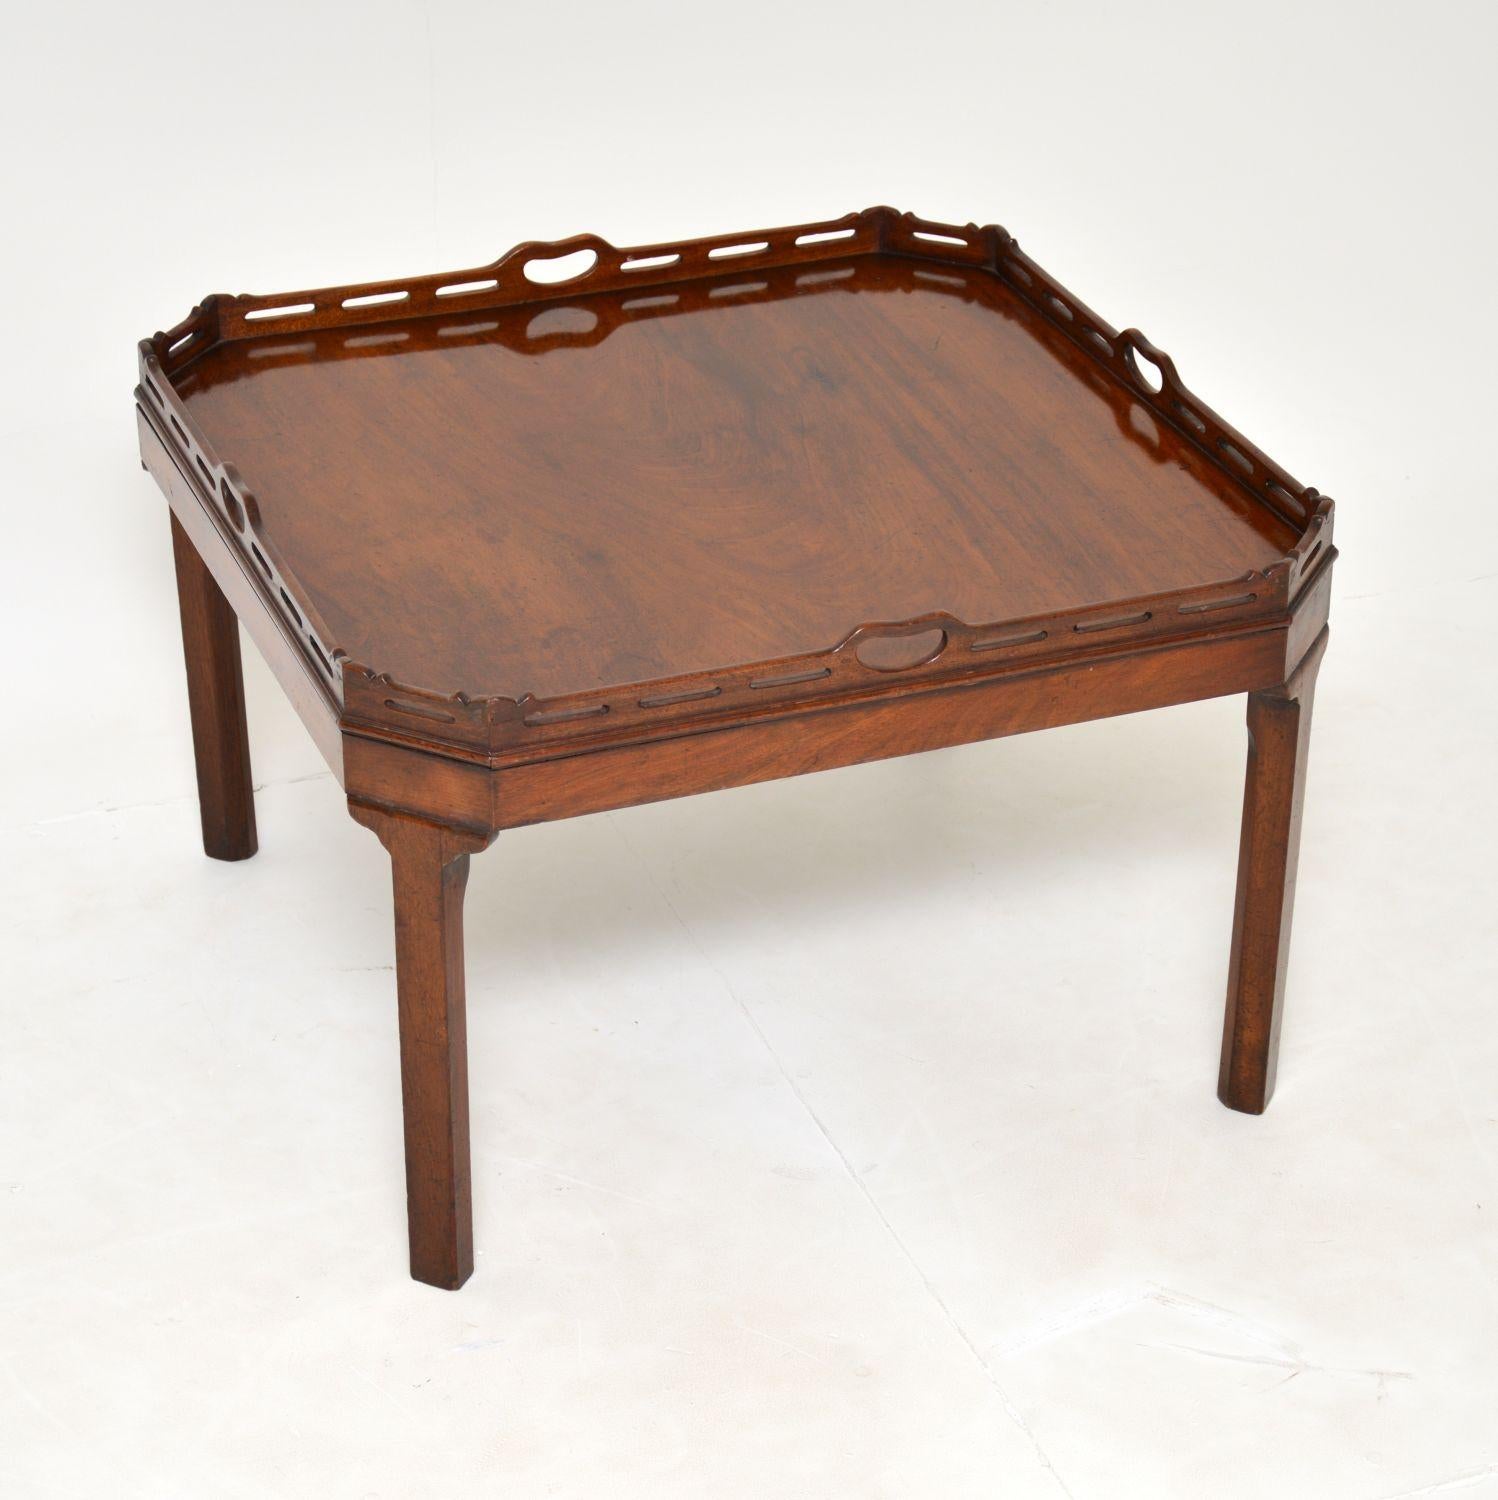 A fantastic antique tray top coffee table. This was made in England, it dates from around the 1900-1910 period.

It is of amazing quality, with solid wood construction throughout. The top has aged beautifully and has an absolutely gorgeous patina.